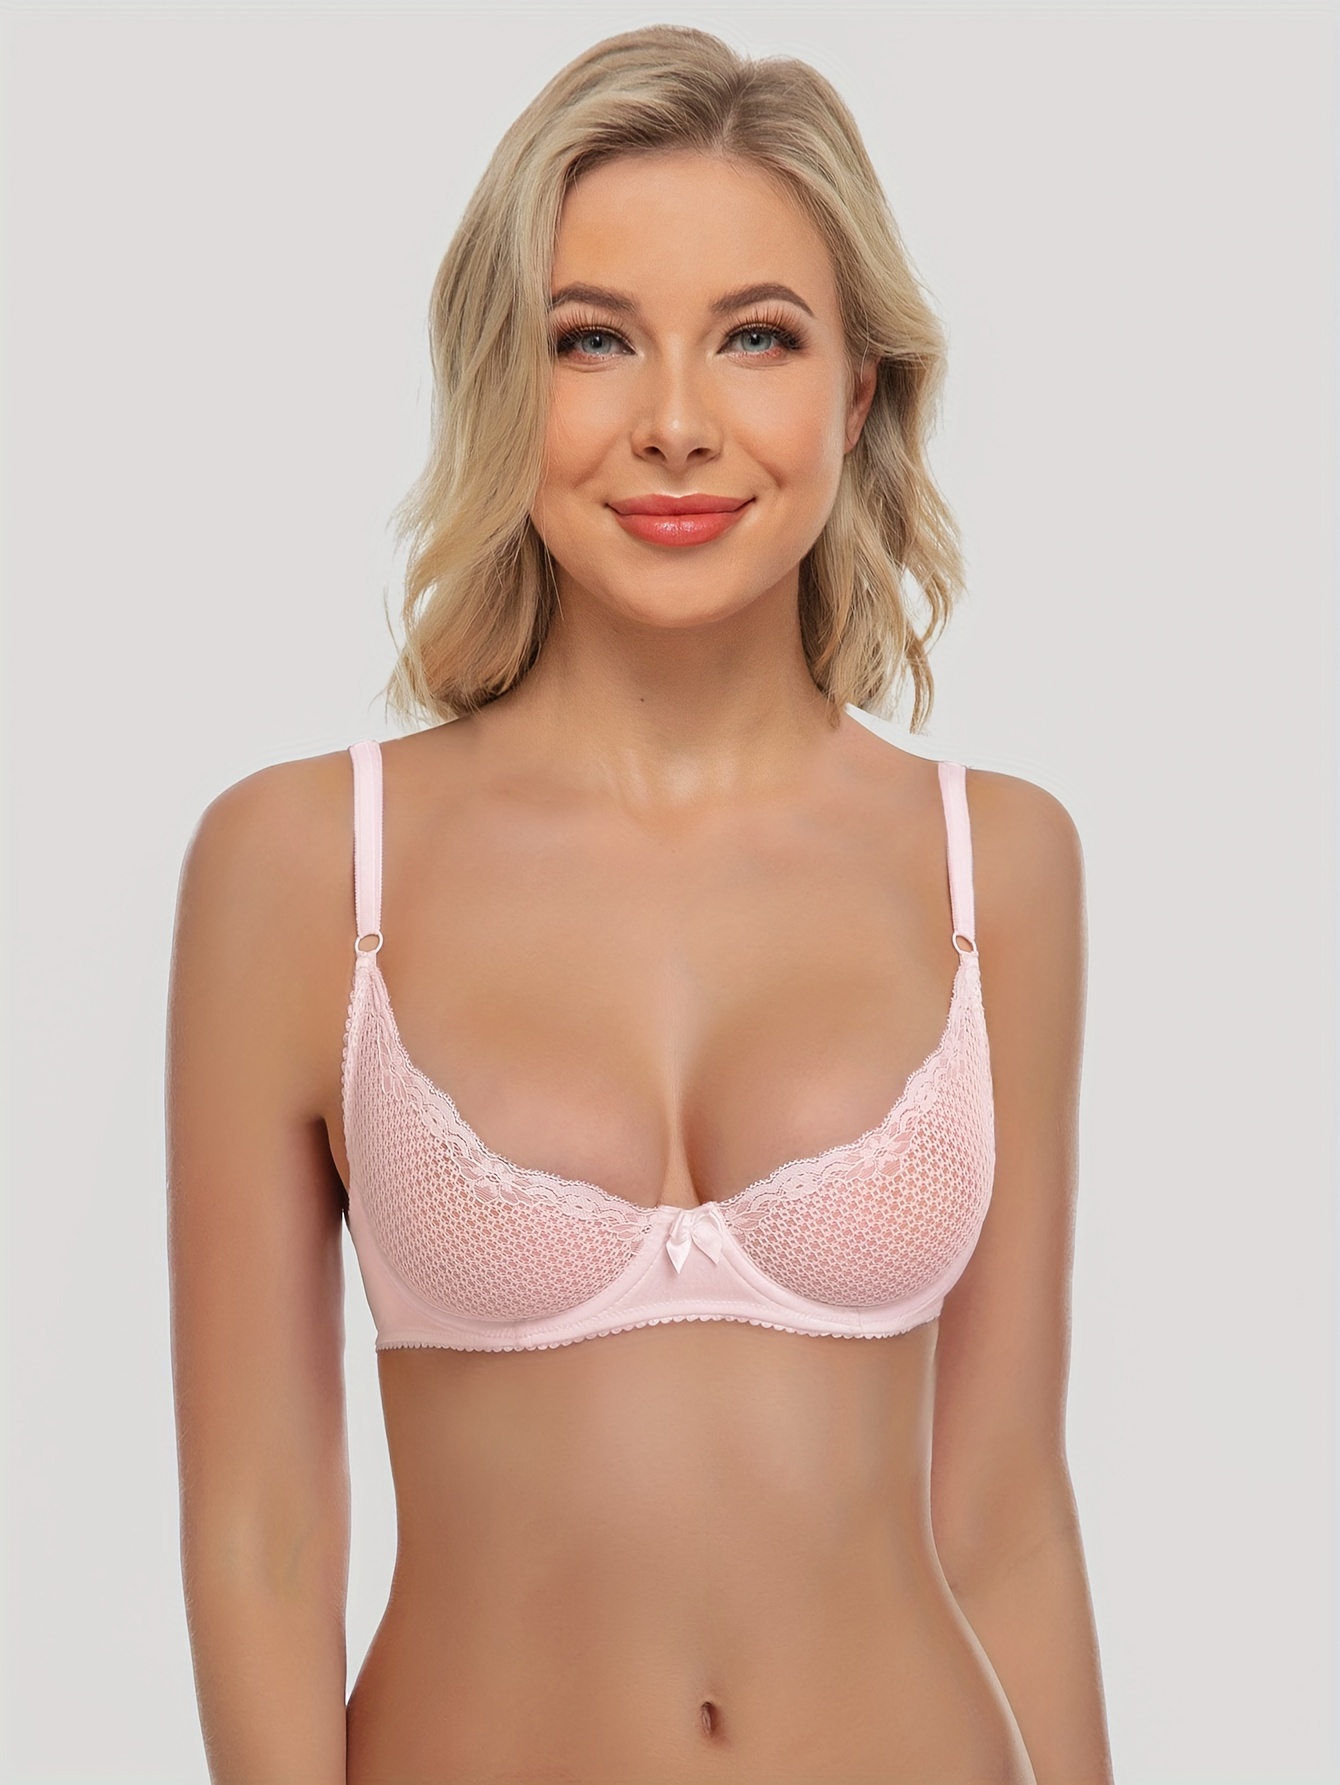 Bliss Beneath - NEW ARRIVAL! This sexy balconette bra is delicate and light  enough to make it the perfect sexy sheer bra! With just a hint of  sheerness, an unlined cup, and